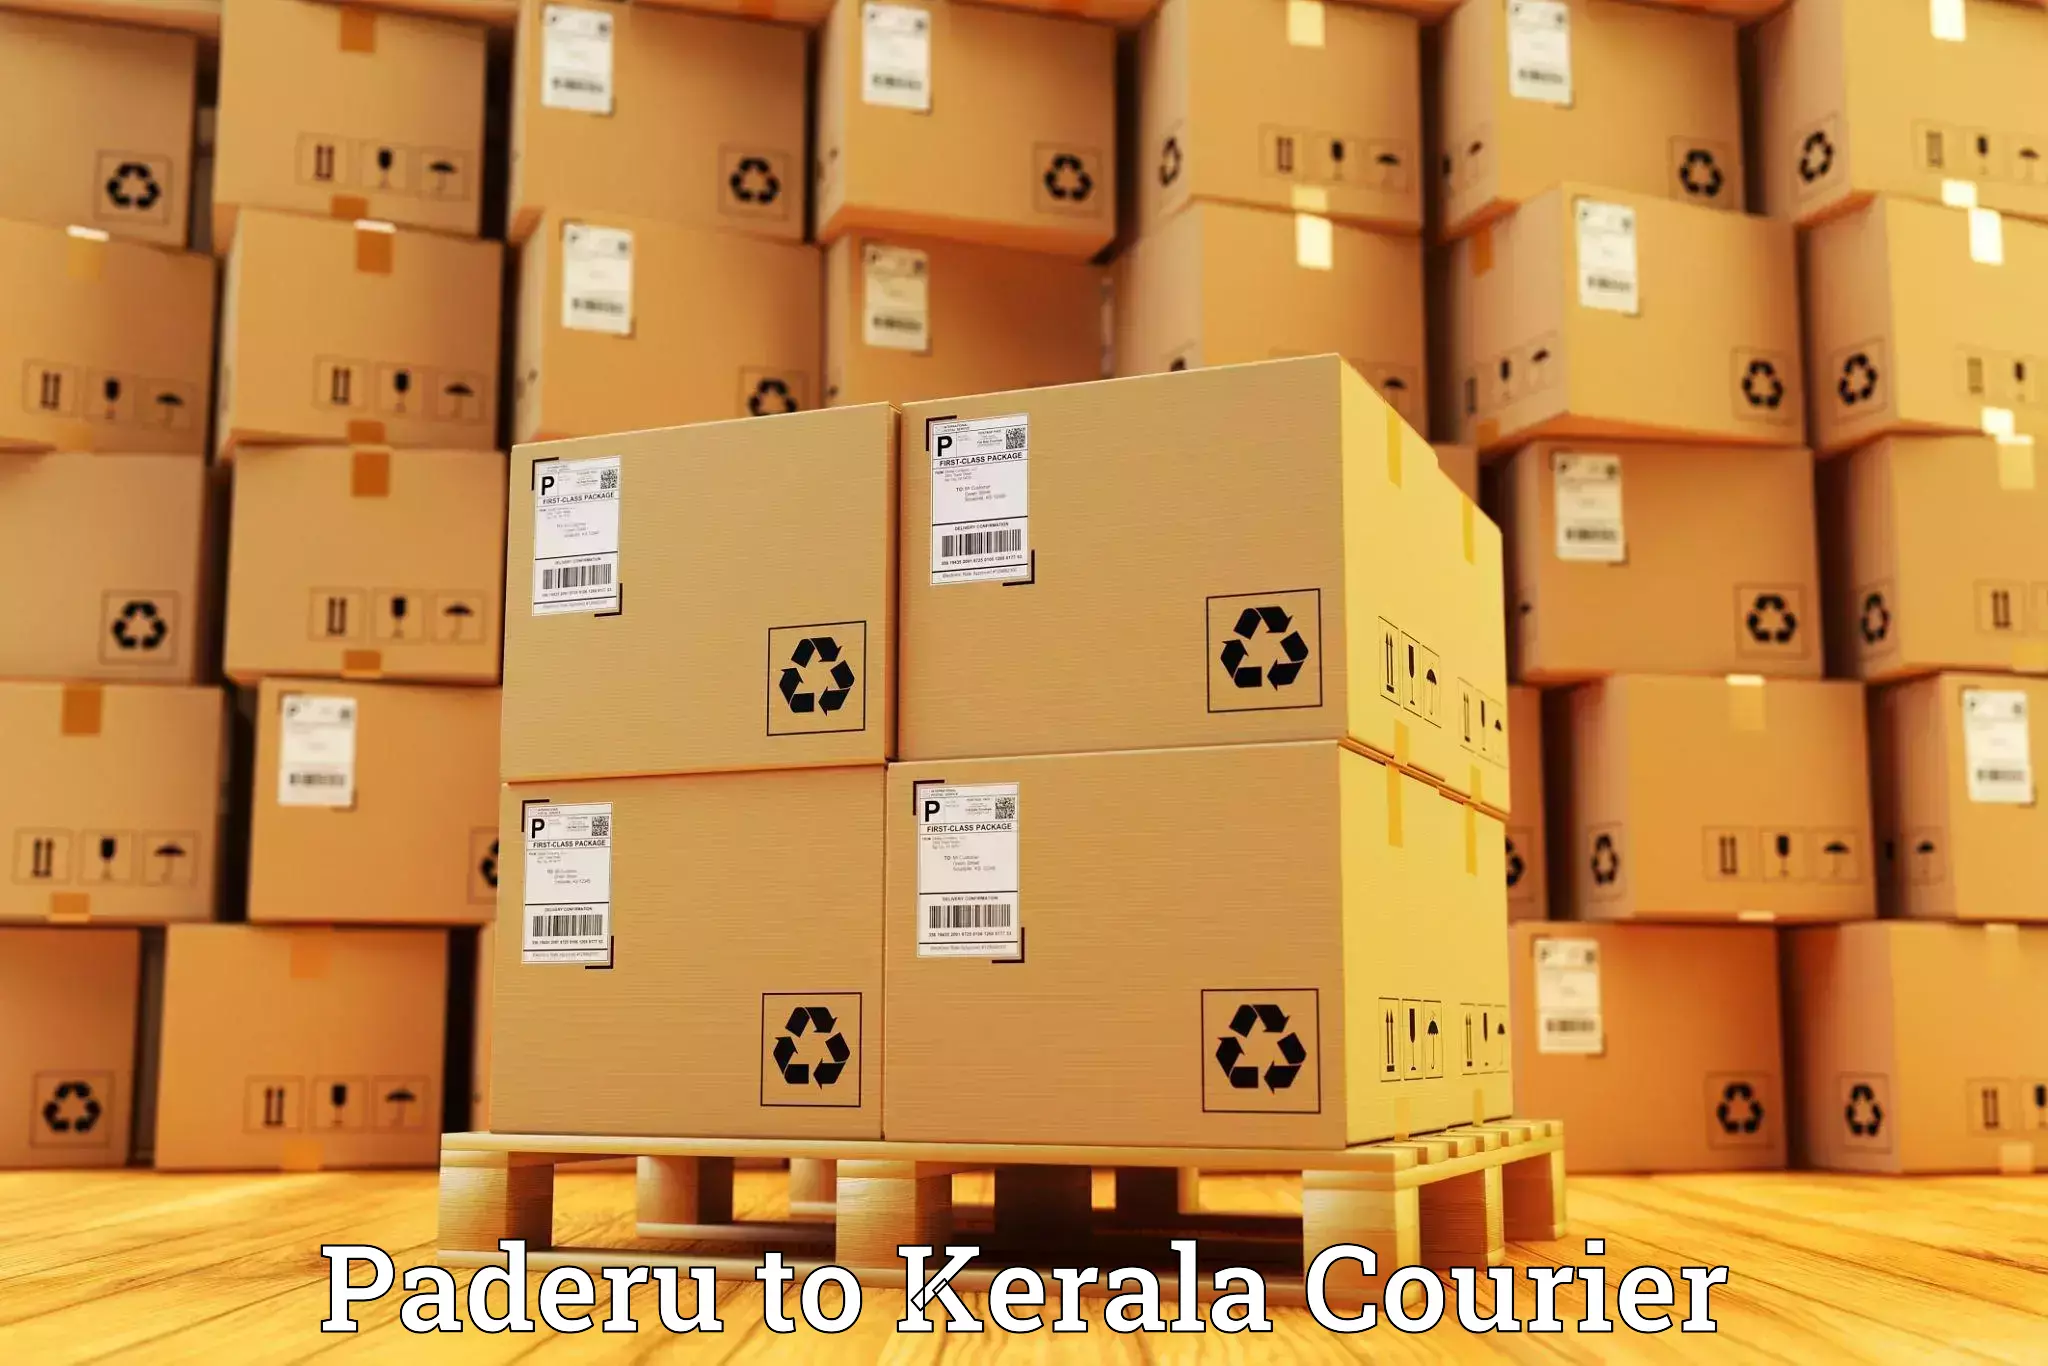 State-of-the-art courier technology in Paderu to Kerala